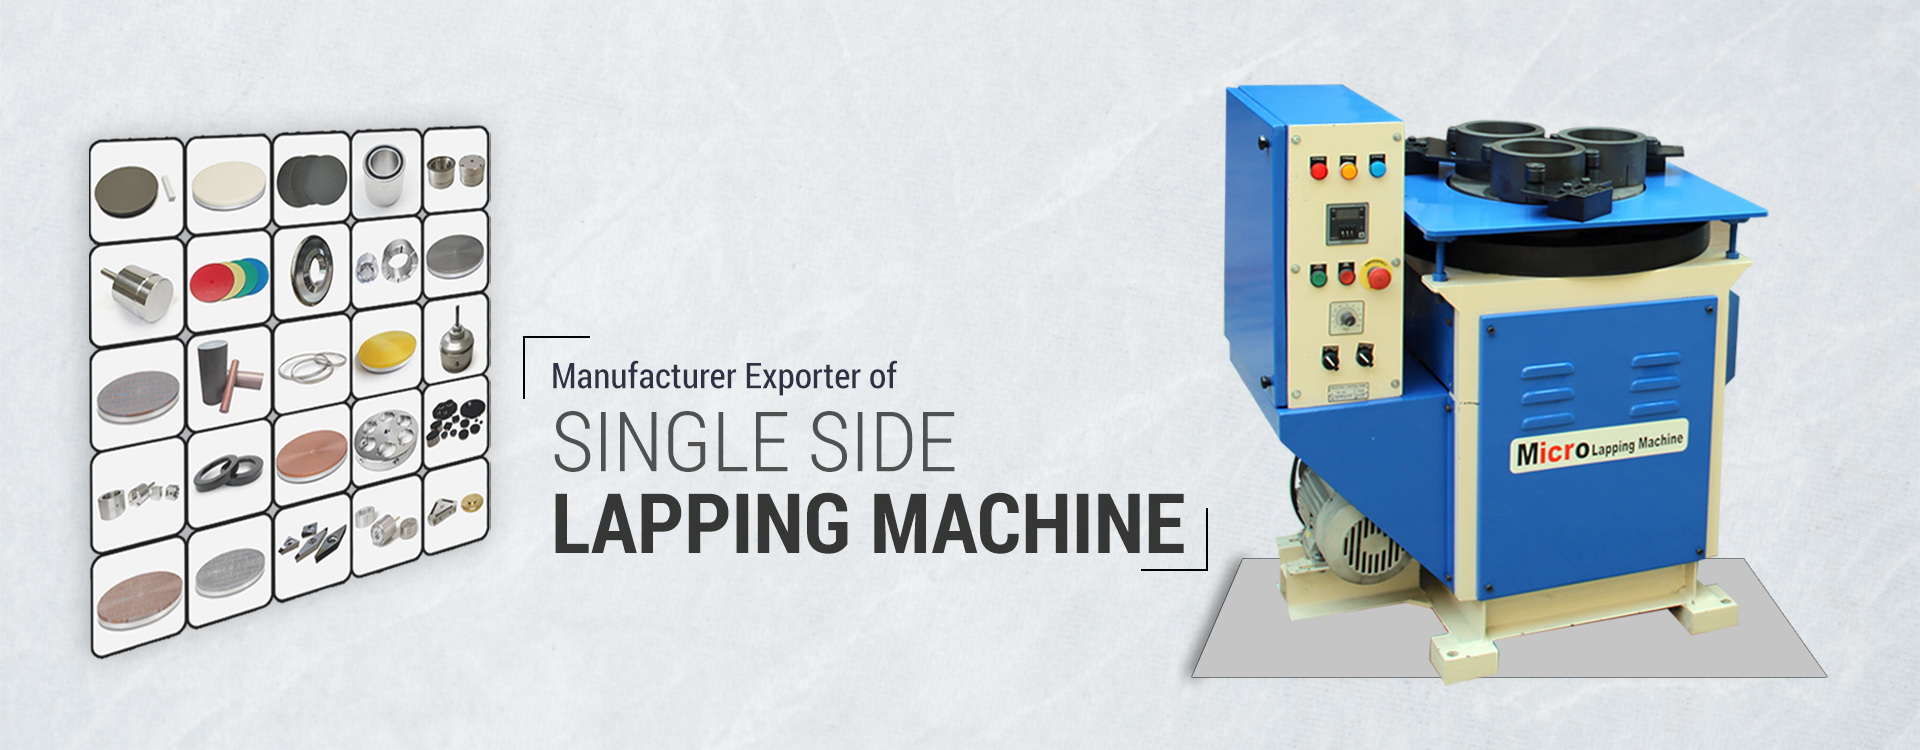 Manufacturer and Exporter of Single Side Lapping Machine India